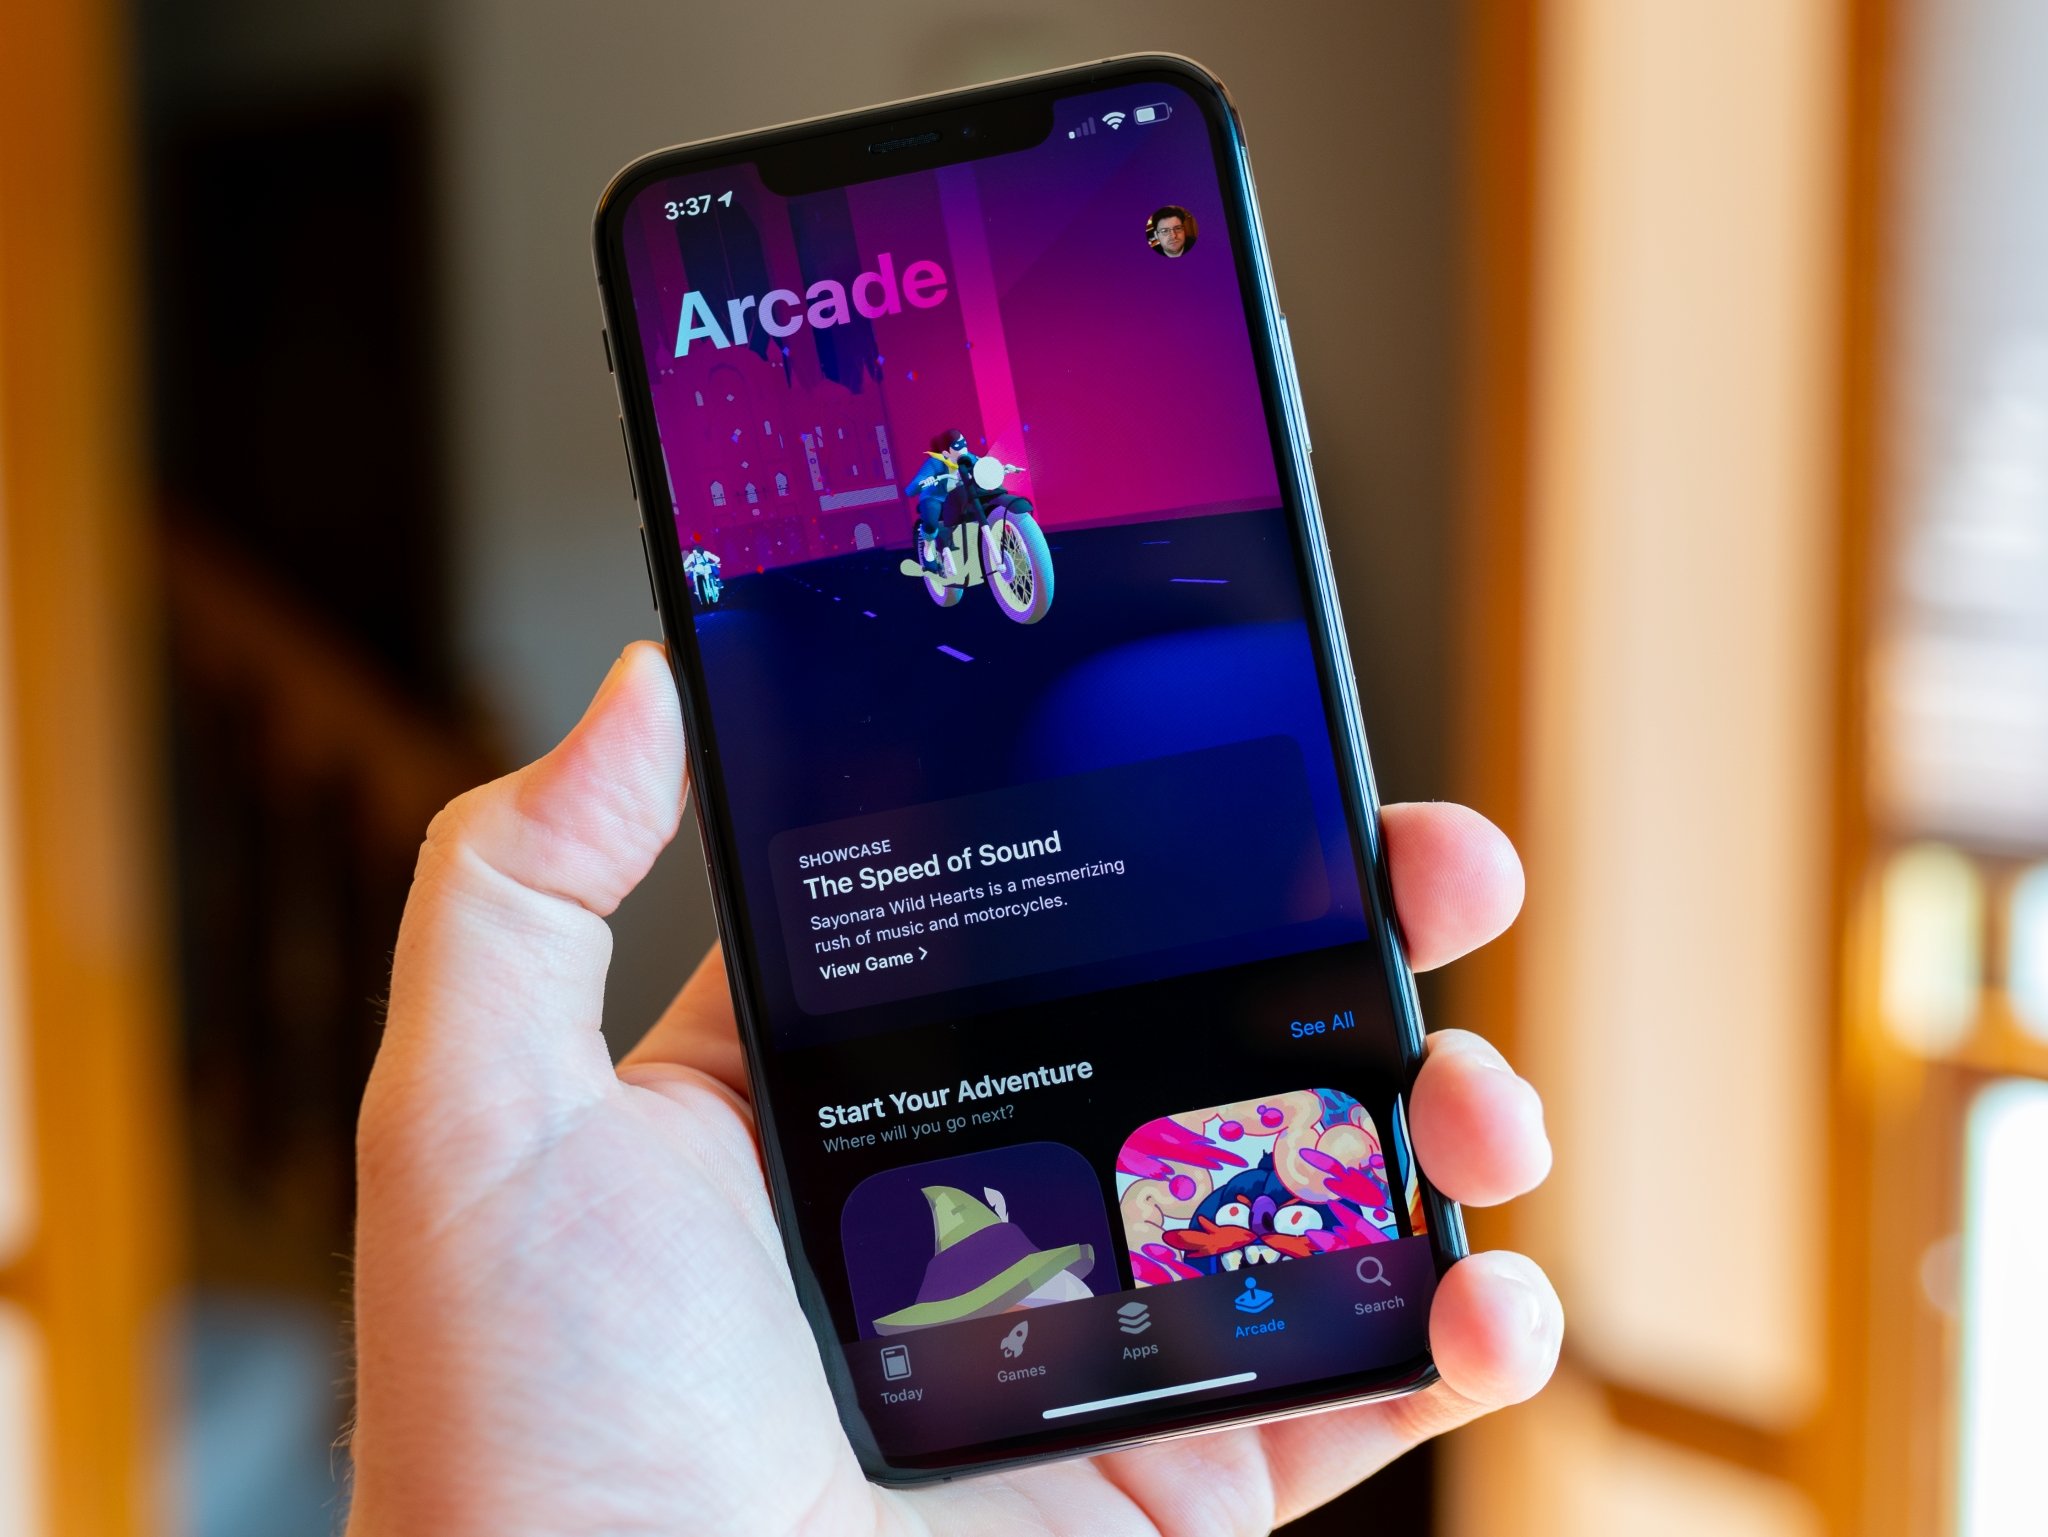 You can now subscribe to Apple Arcade for $49.99 per year and save $10